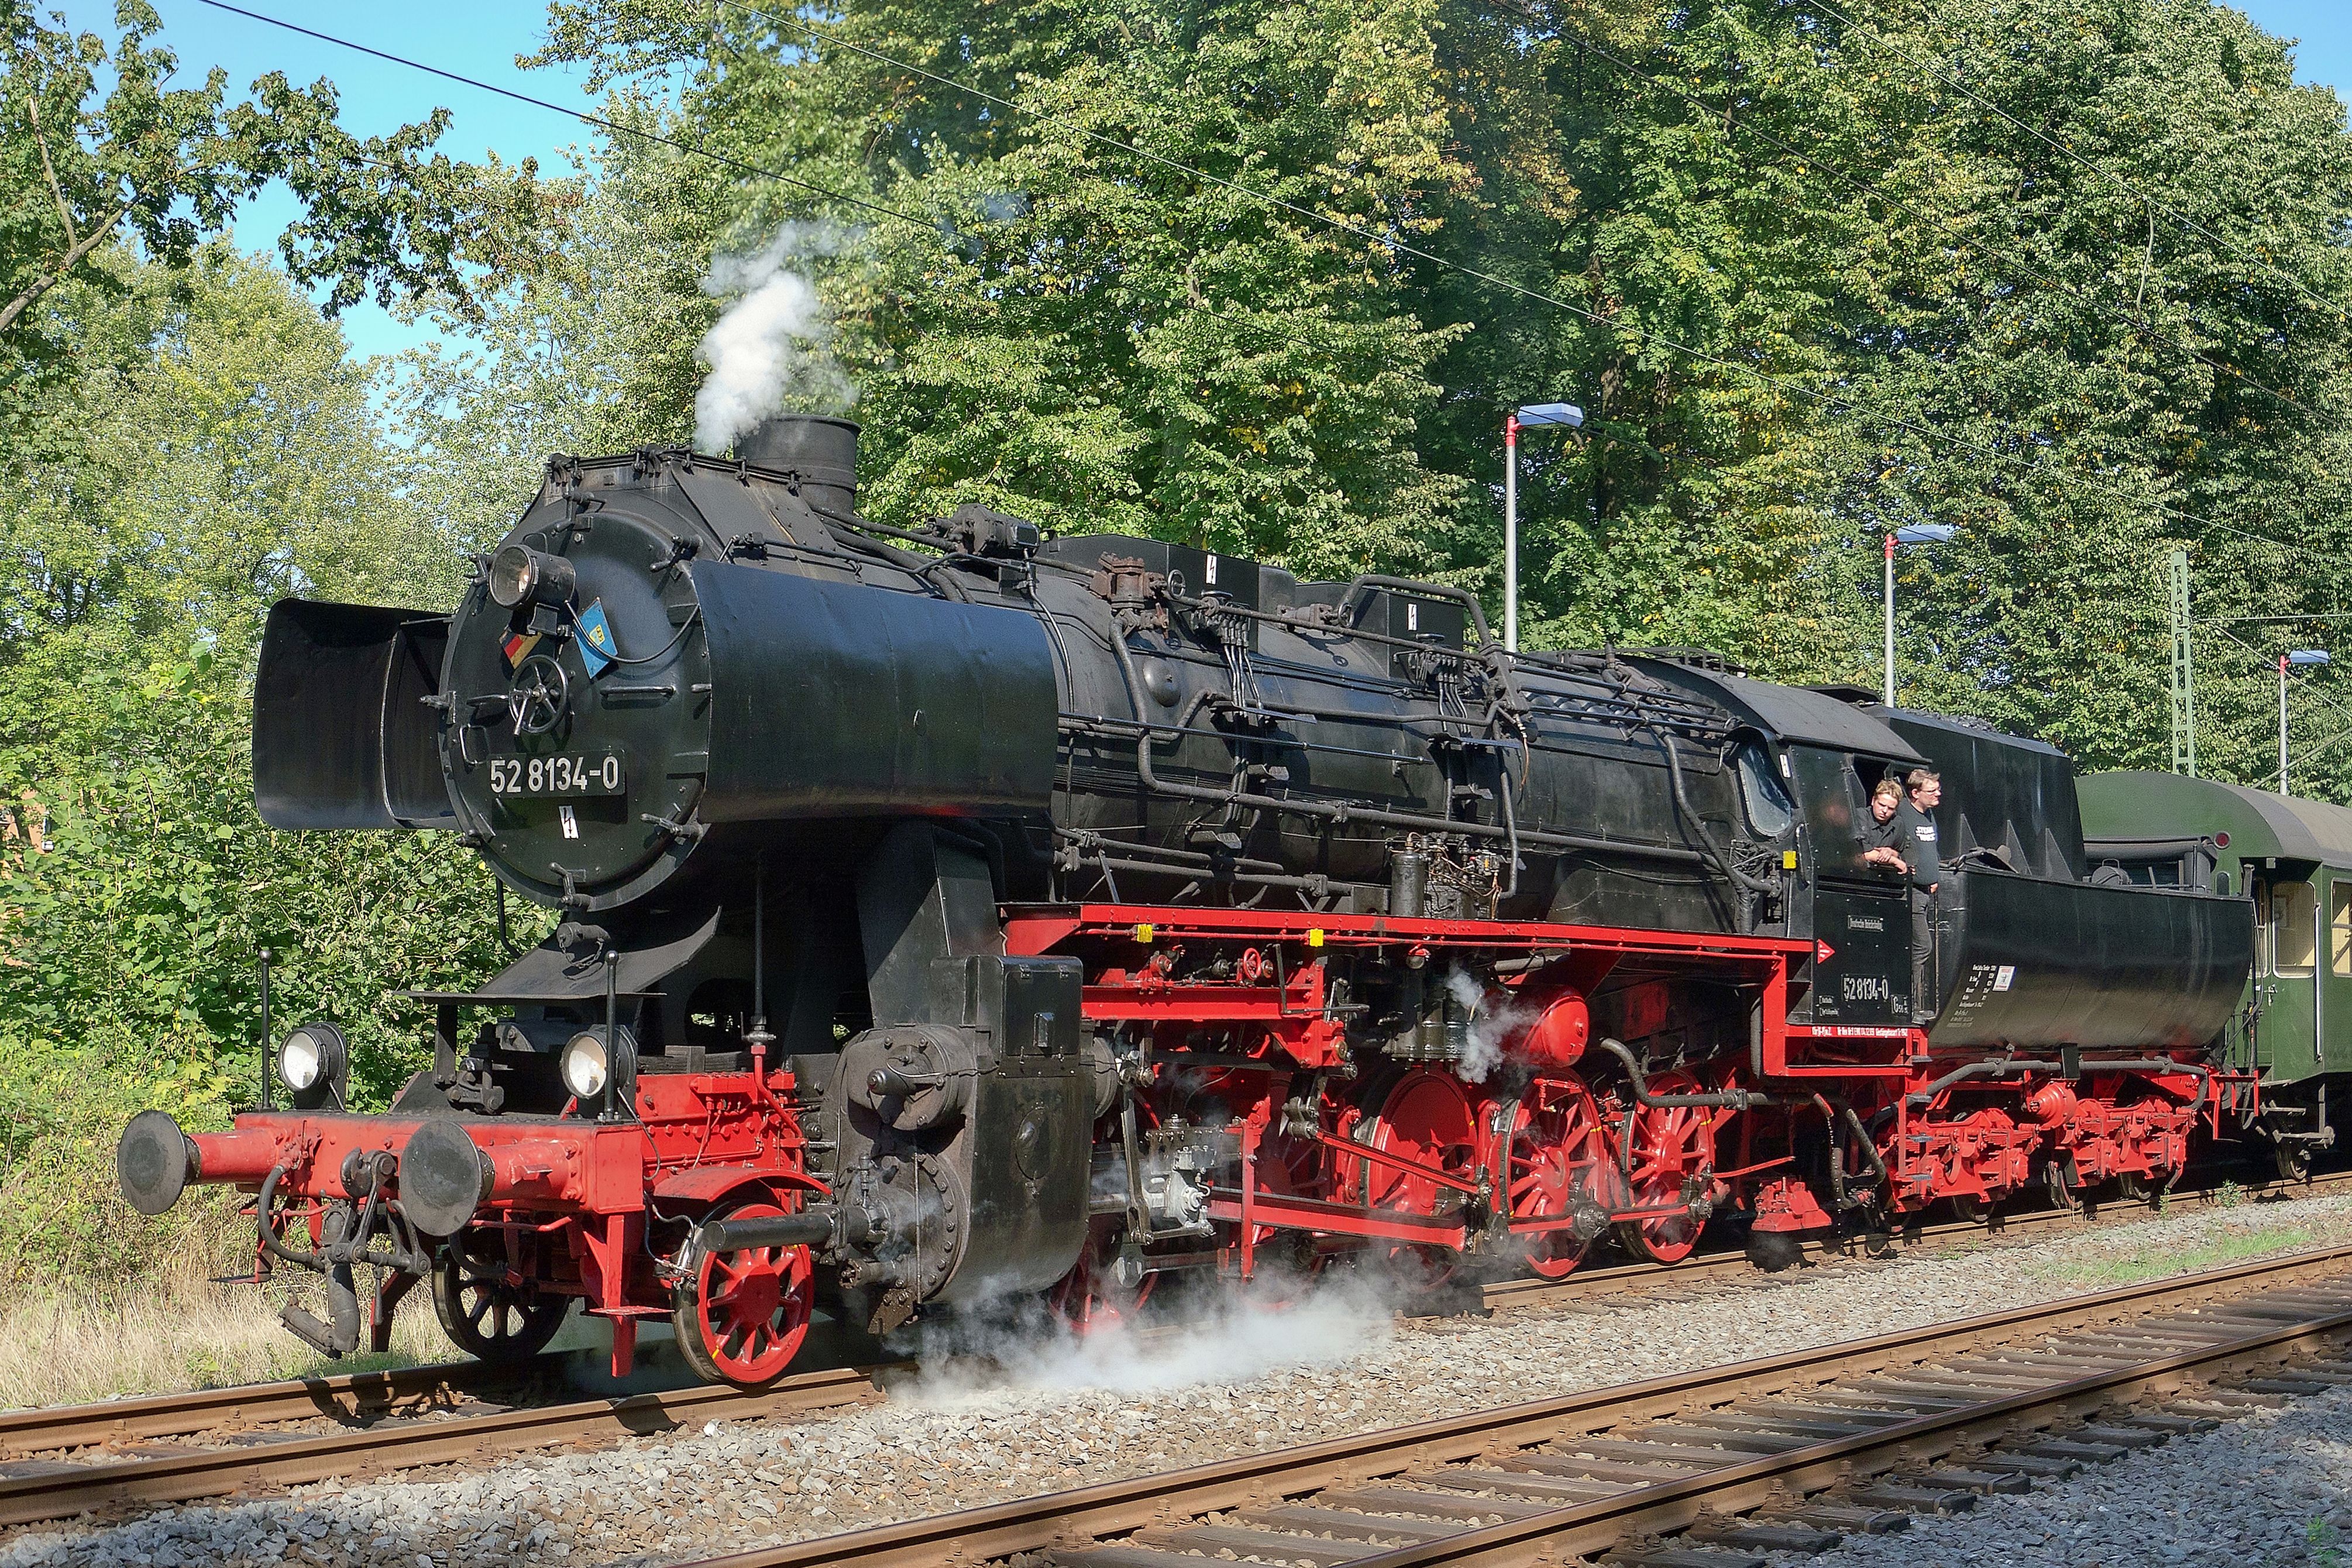 Steam locomotives are the traditional icon for thermodynamics We look at the link between entropy, information, analytics and data science. MIT Prof Claude Shannon & Qualcomm Photo credit: Wikimedia/Tenderlok/CC-BY-SA-3